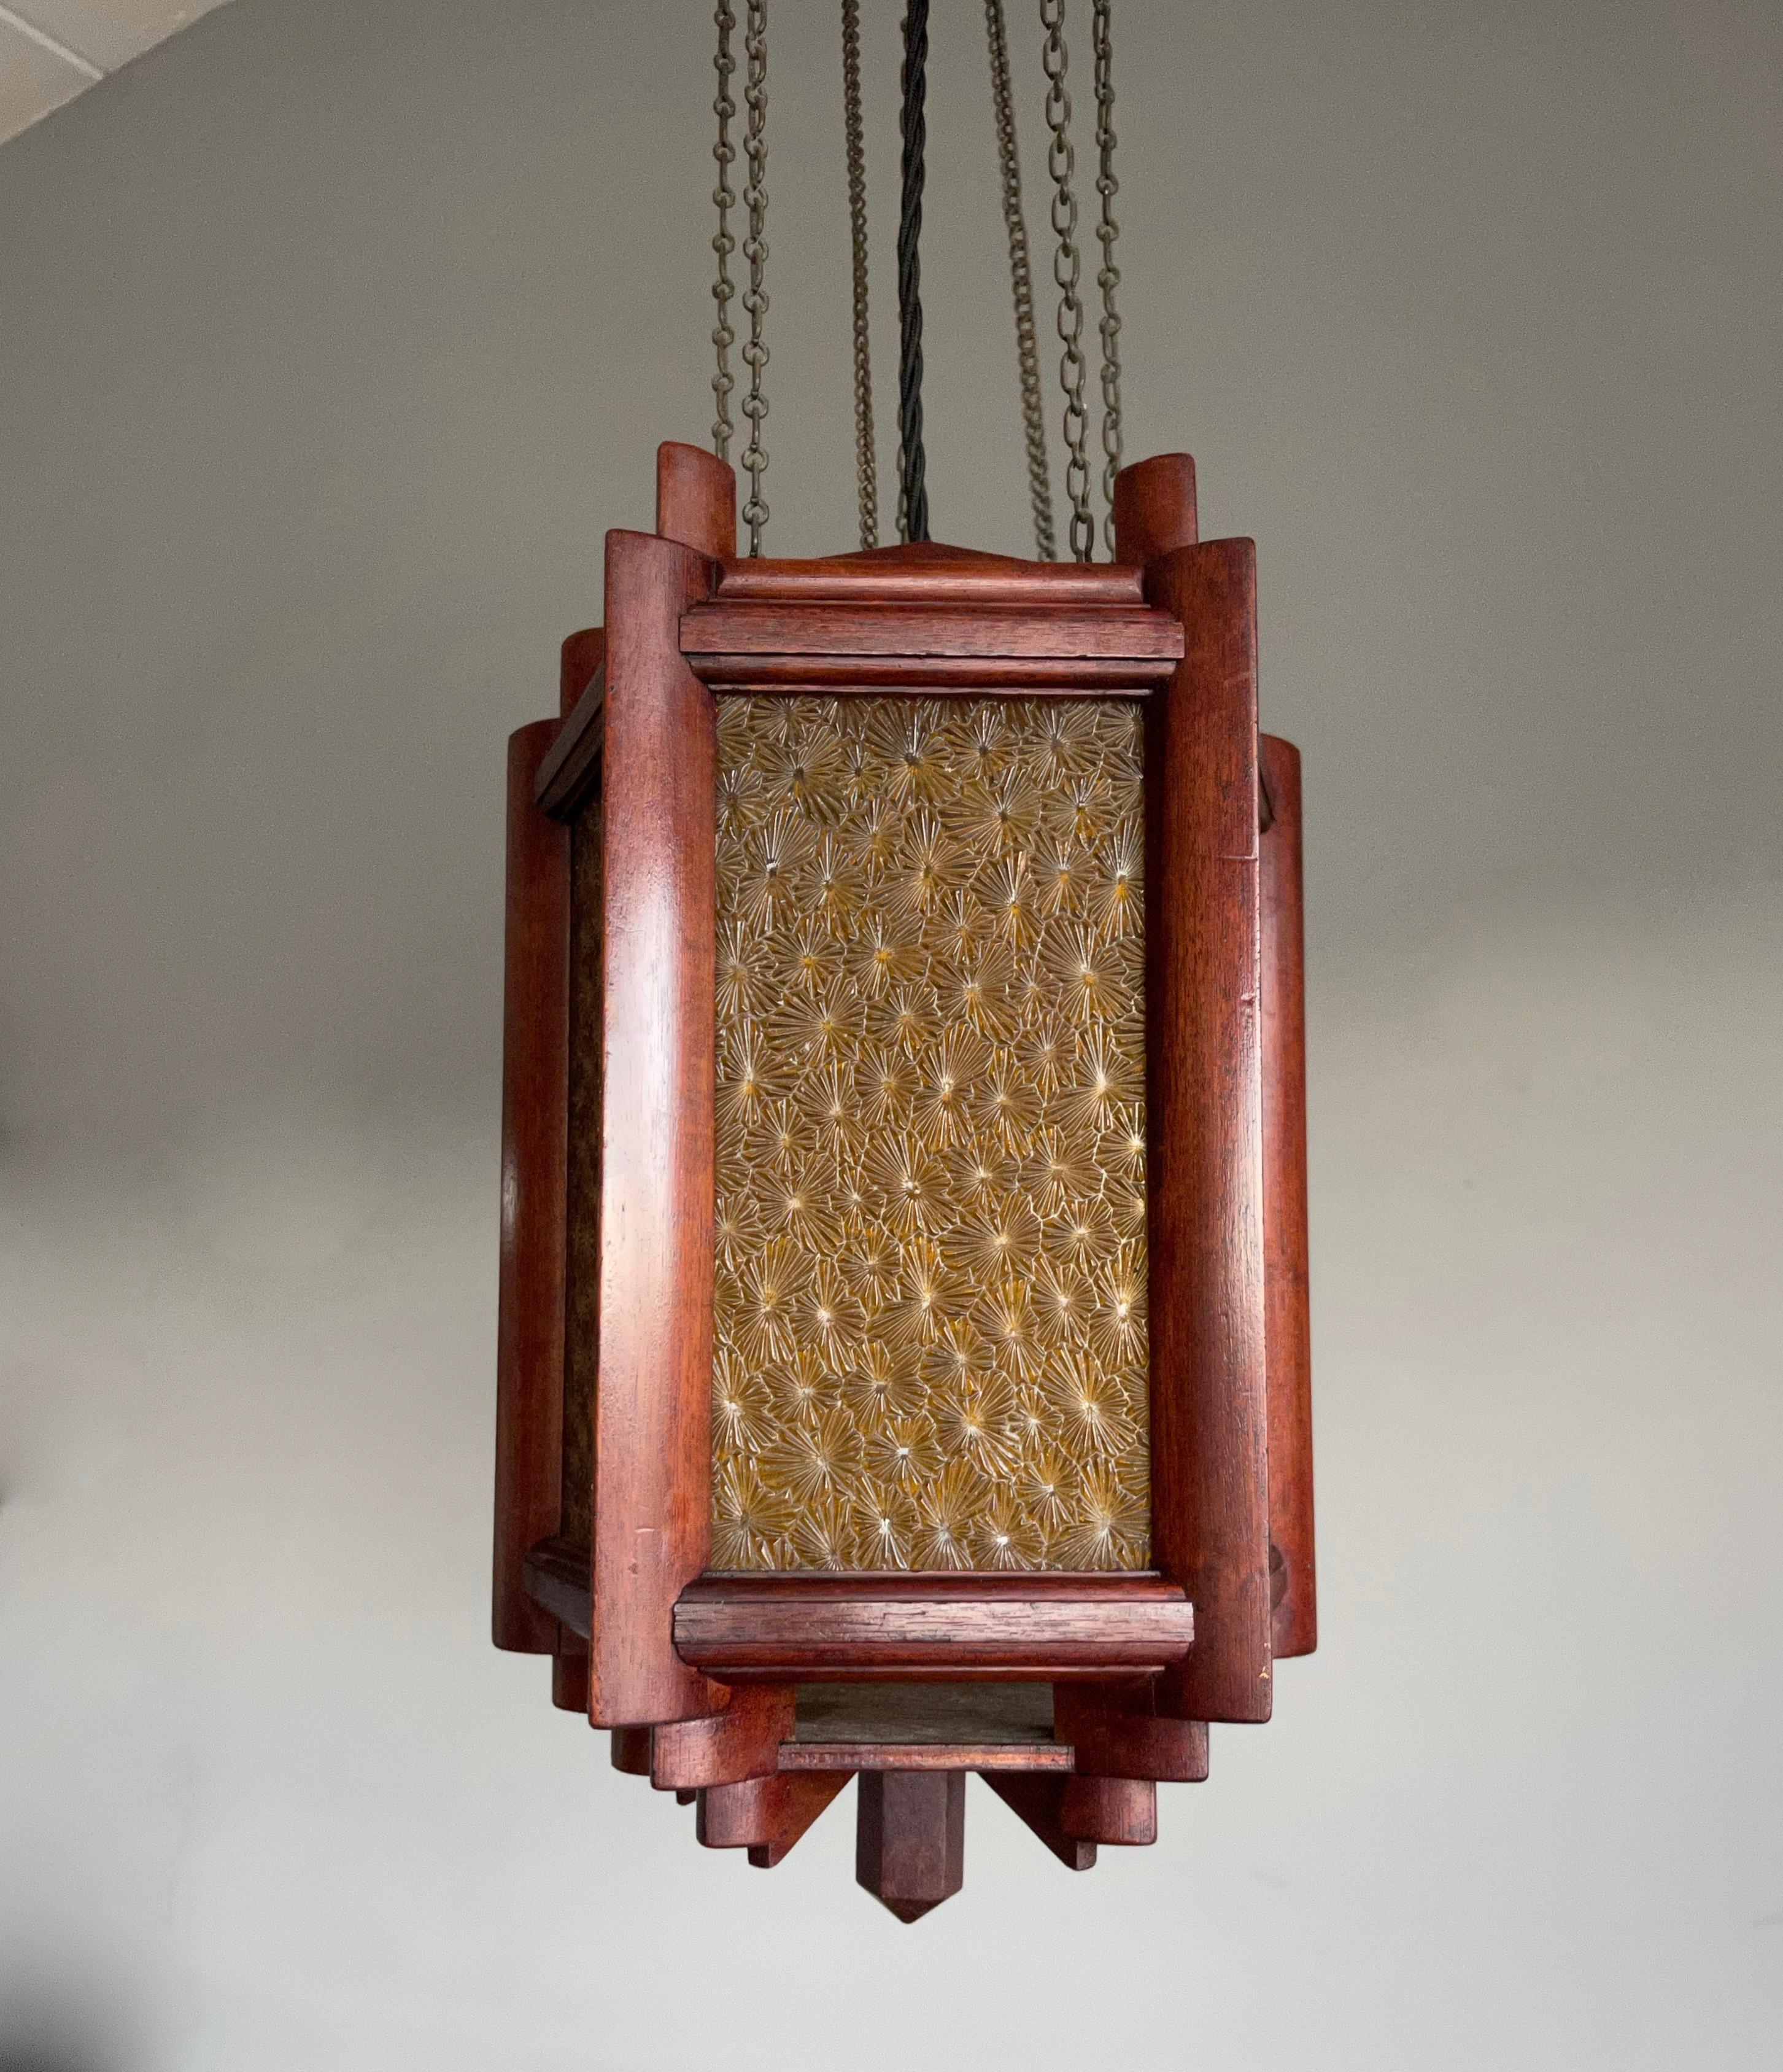 Mint condition, perfectly geometrical handmade Arts and Crafts lantern, ceiling light.

Finding rare or unique light fixtures always makes our day and when we came across this handcrafted wooden pendant we were immediately 'sold'. The calm and